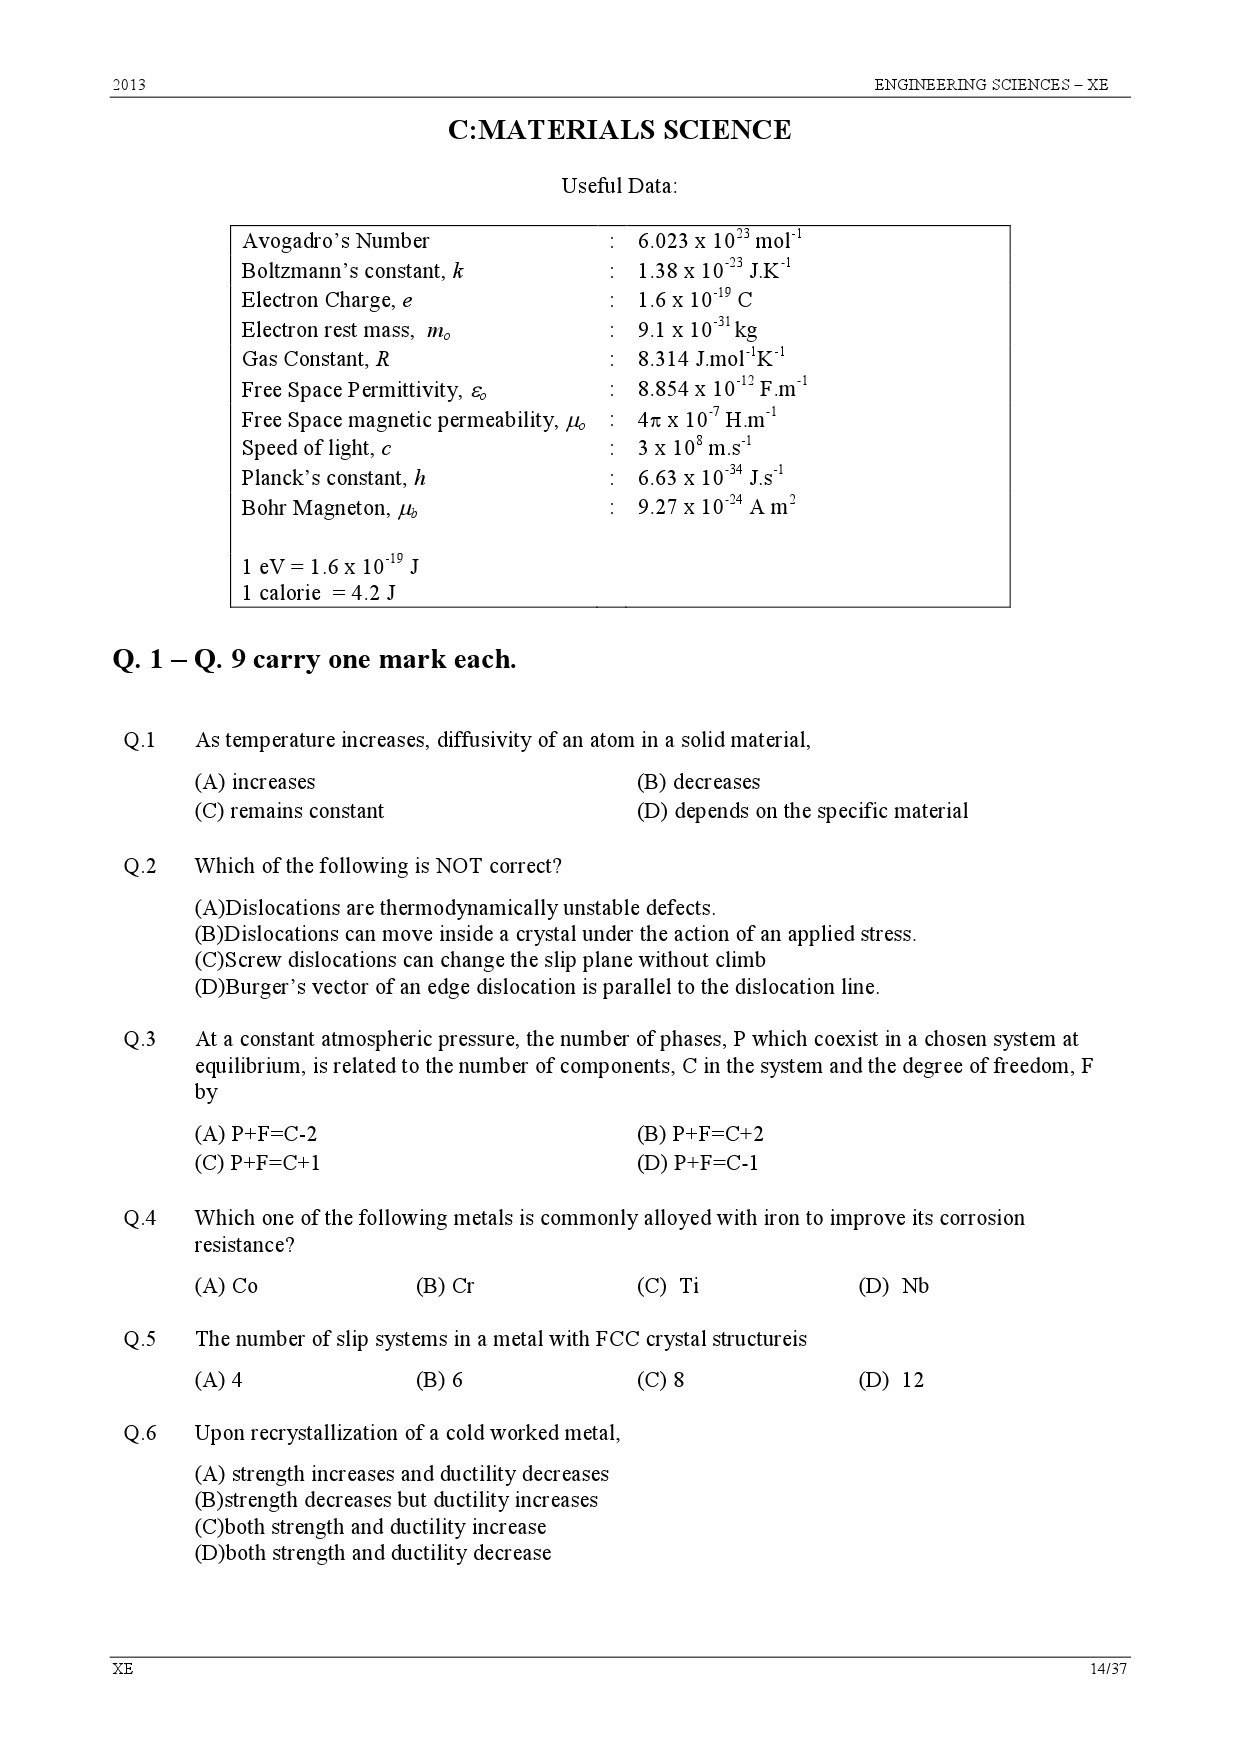 GATE Exam Question Paper 2013 Engineering Sciences 14